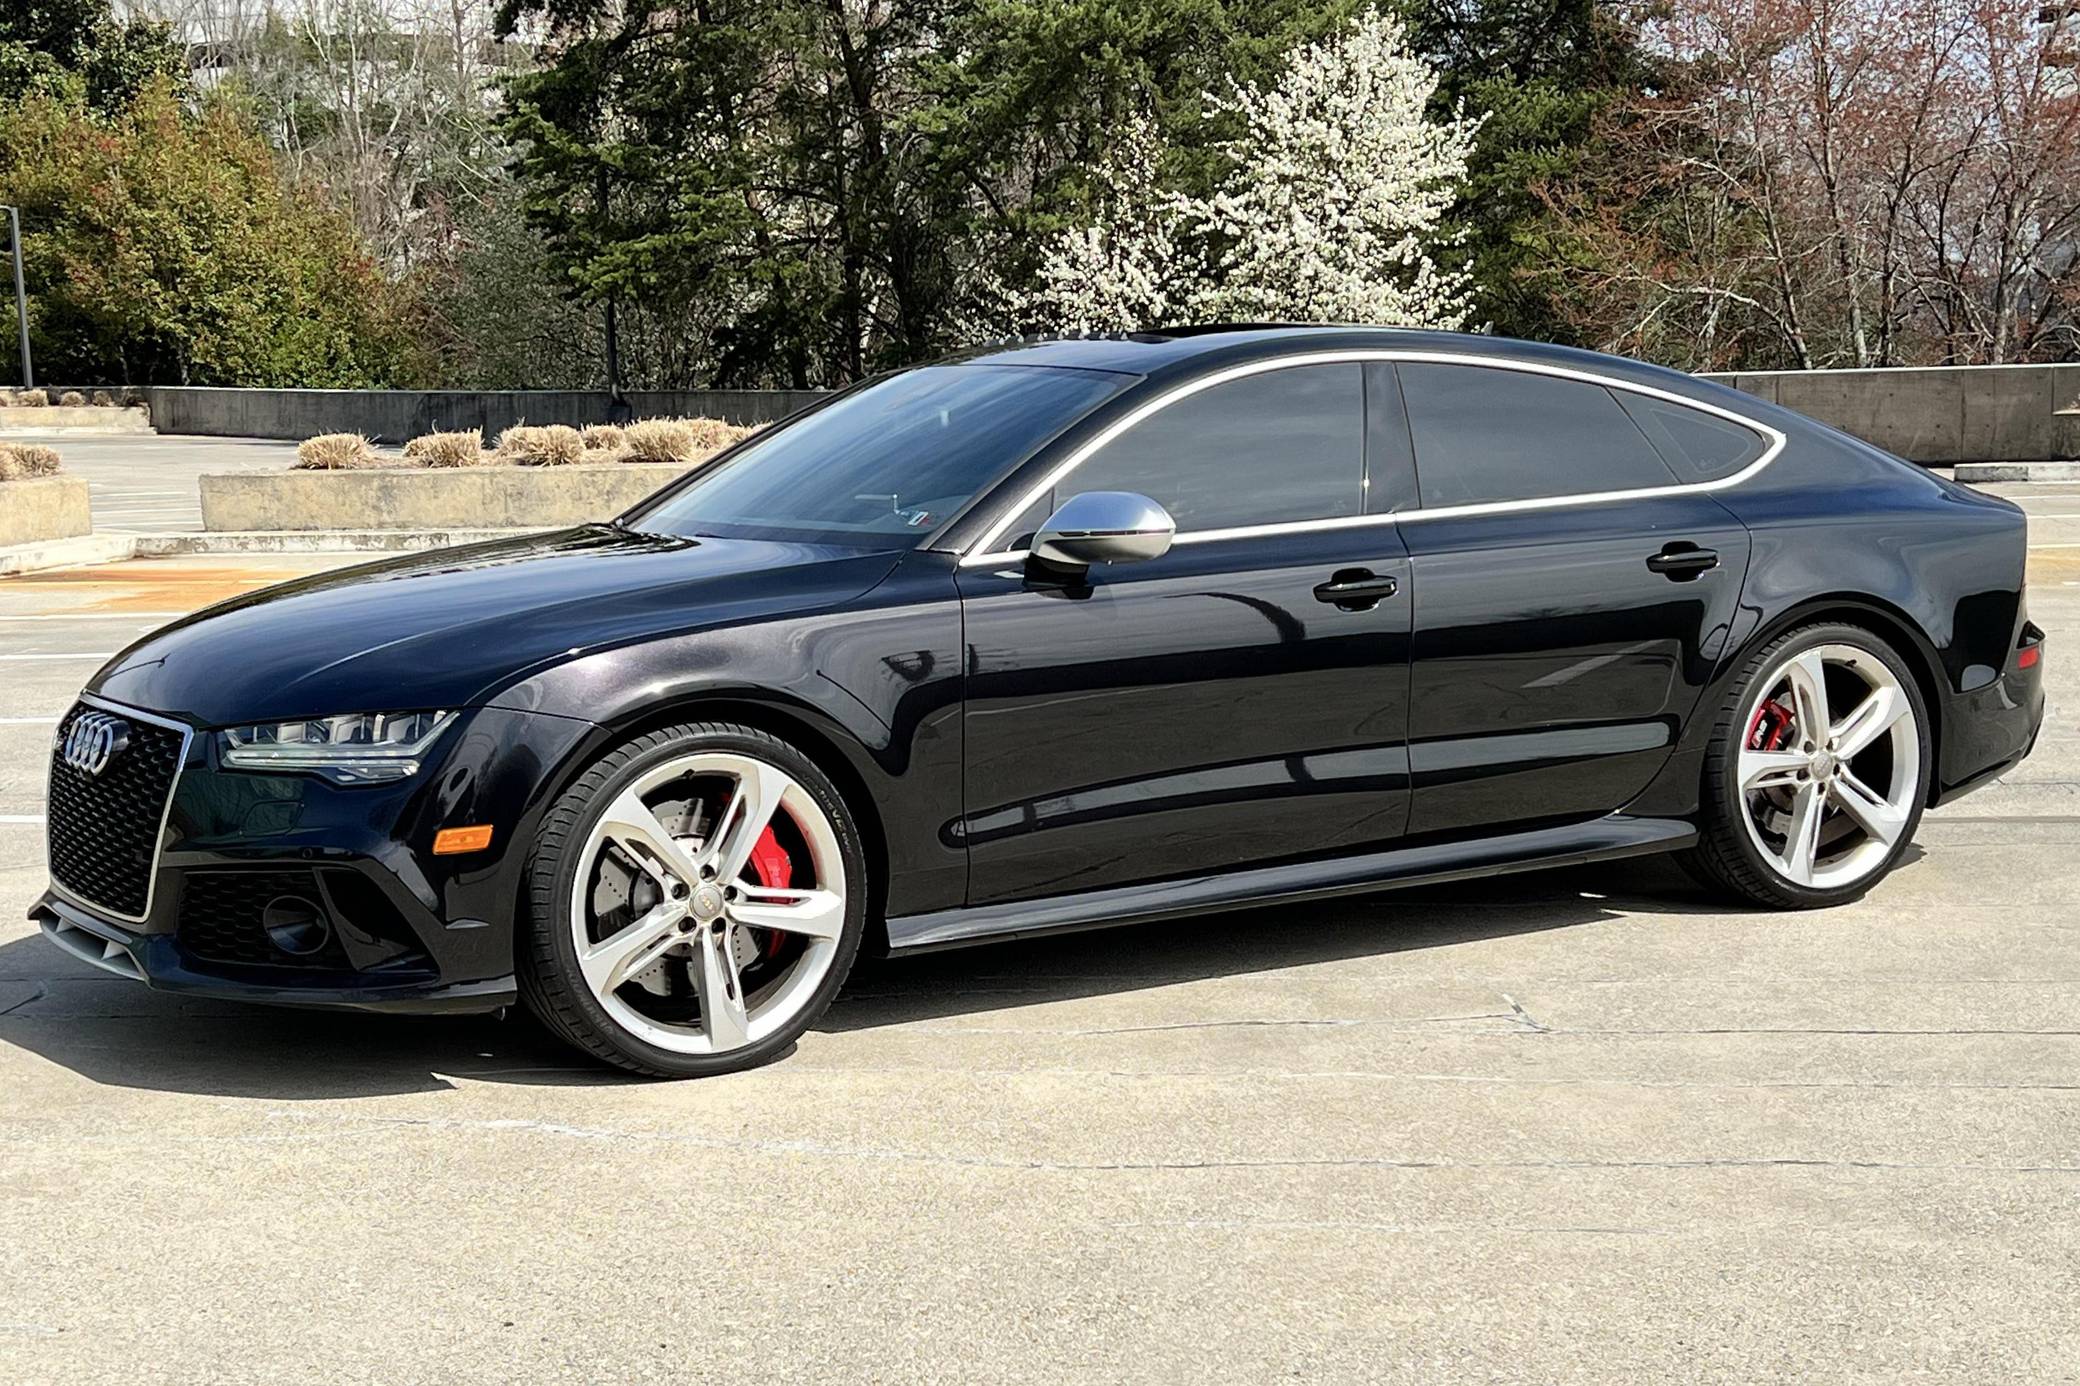 Audi RS7 With Color Shifting Red-To-Black Finish Looks Stunning